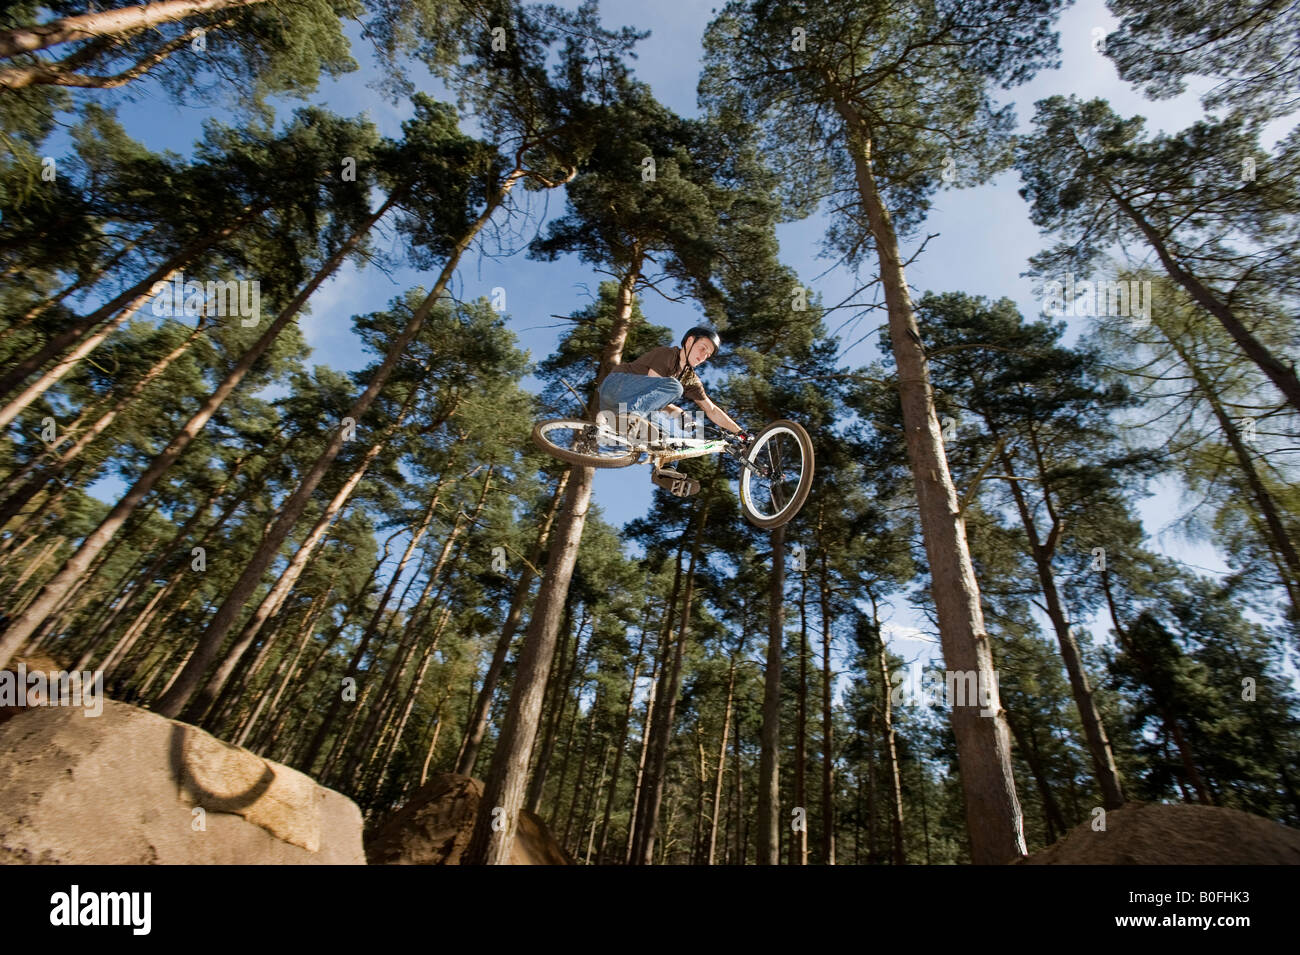 mountain bike dirt jump trick stunt air leap bmx mountain bikes MTB  BMX dirt jumper pulls stunts in trees sick whip youth sport Stock Photo